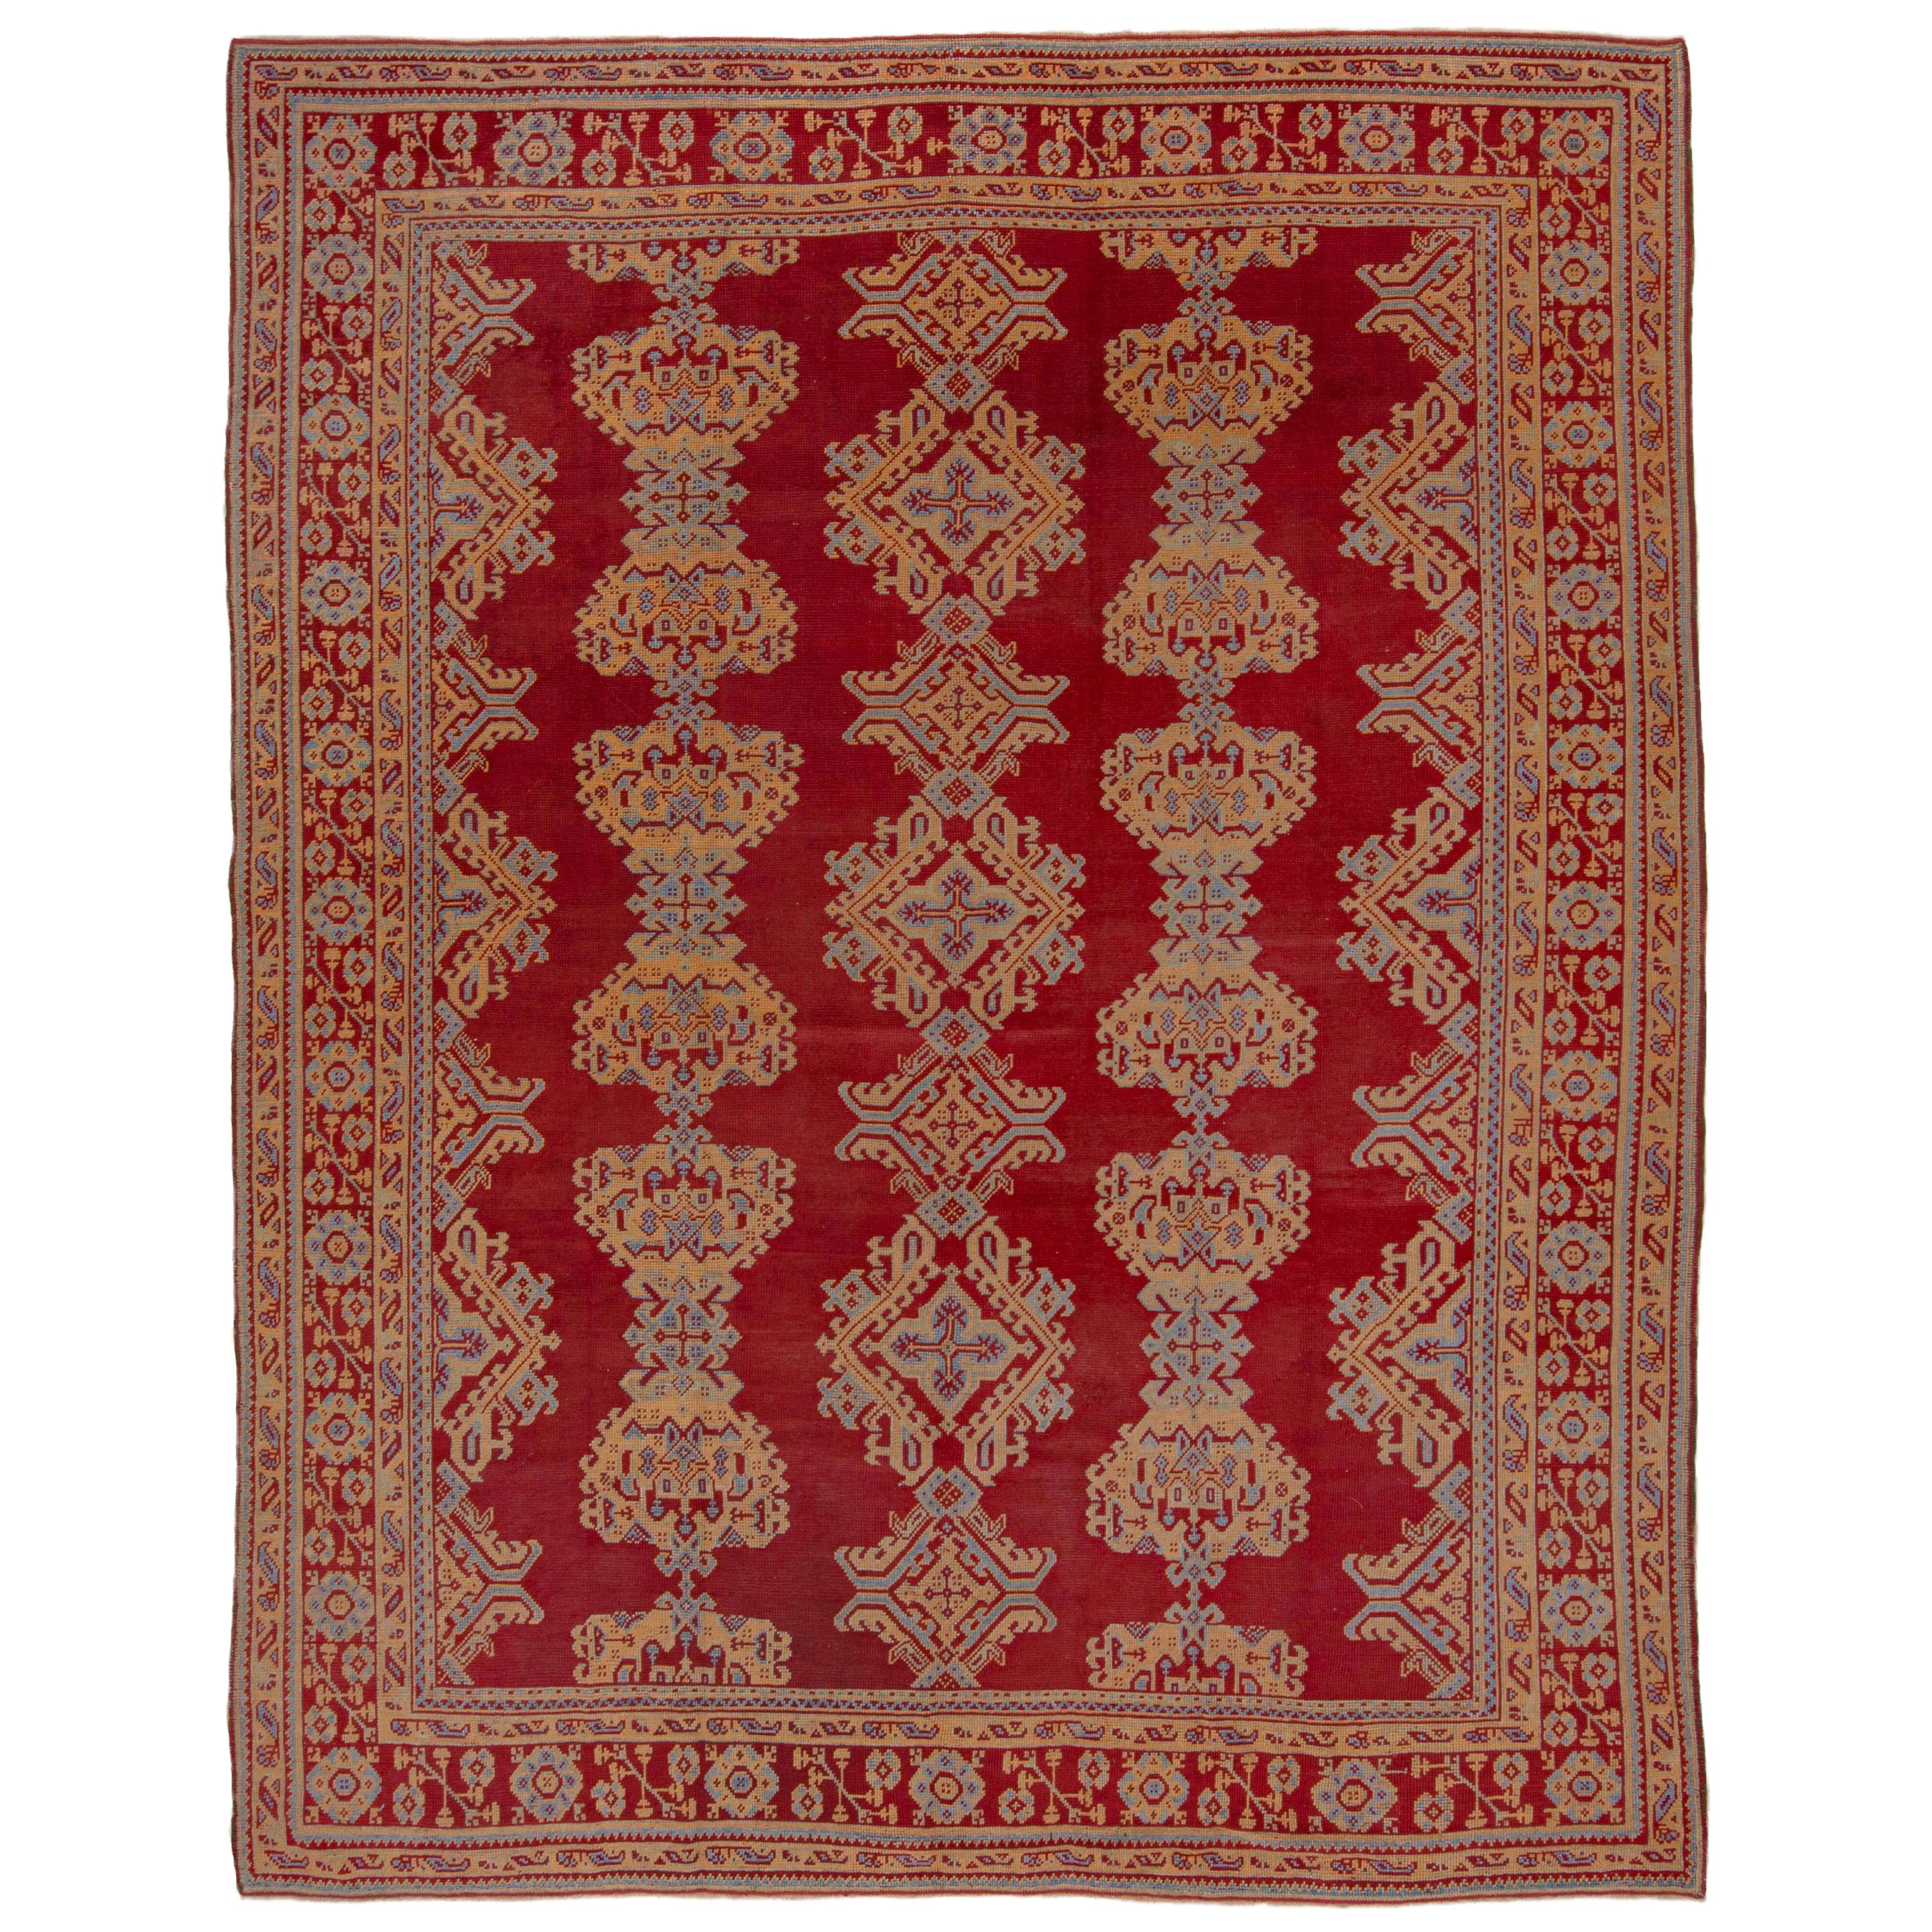 Antique Red Oushak Rug with Orange & Blue Borders, Circa 1920s